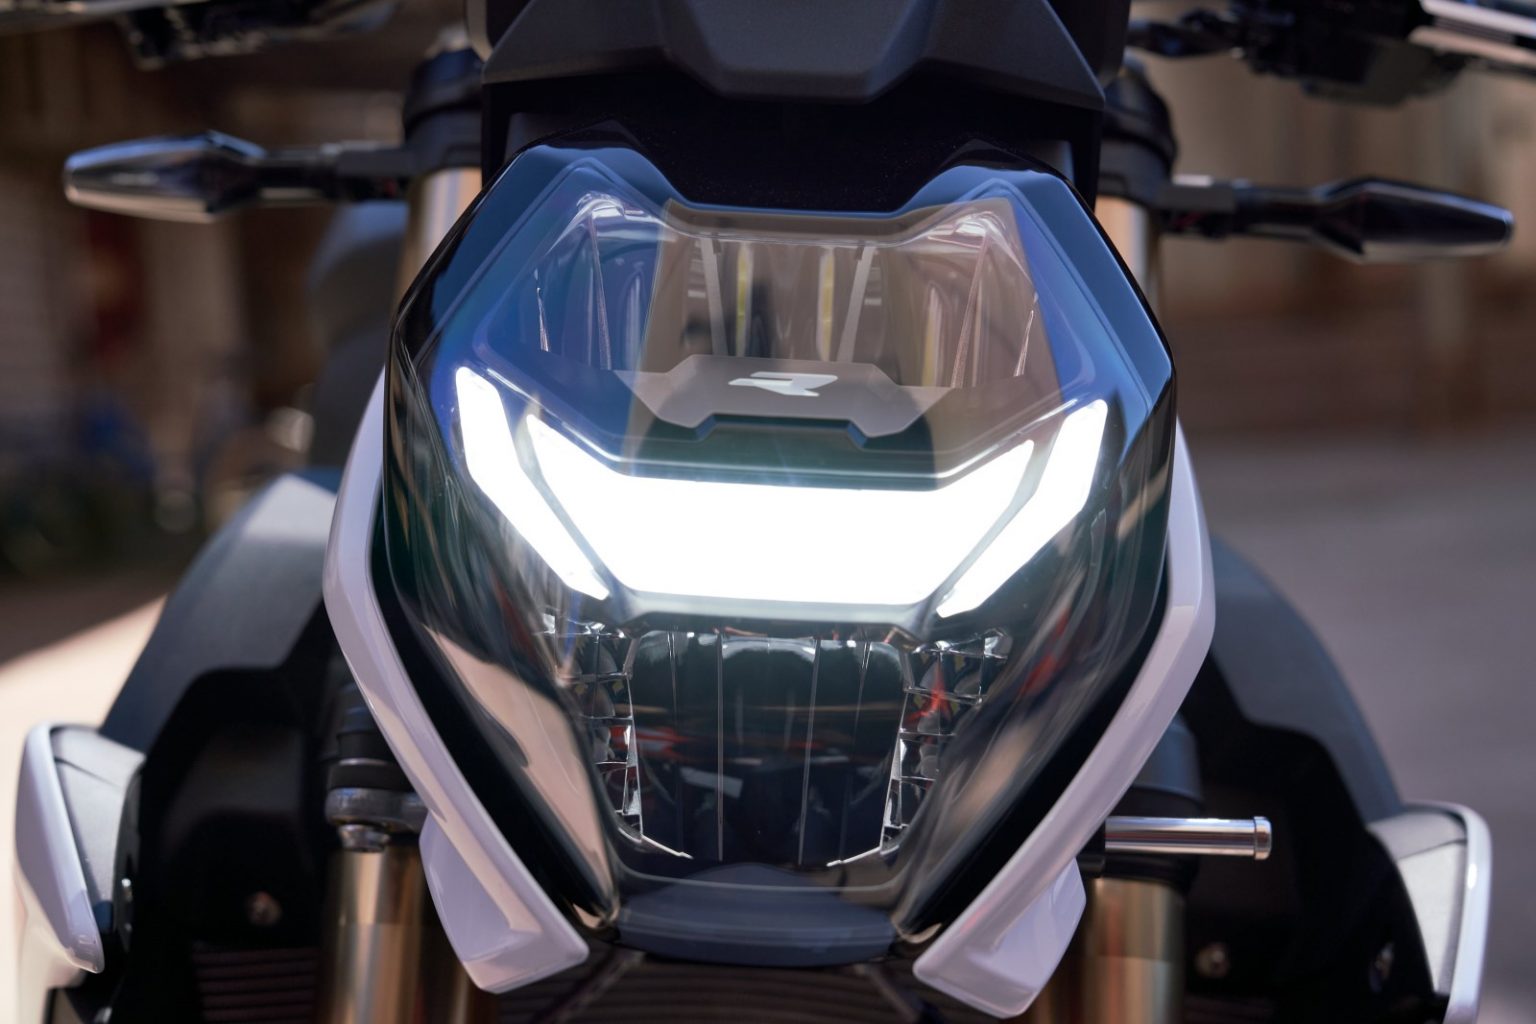 BMW S 1000 R, the naked sporty features will now be even lighter and more technological